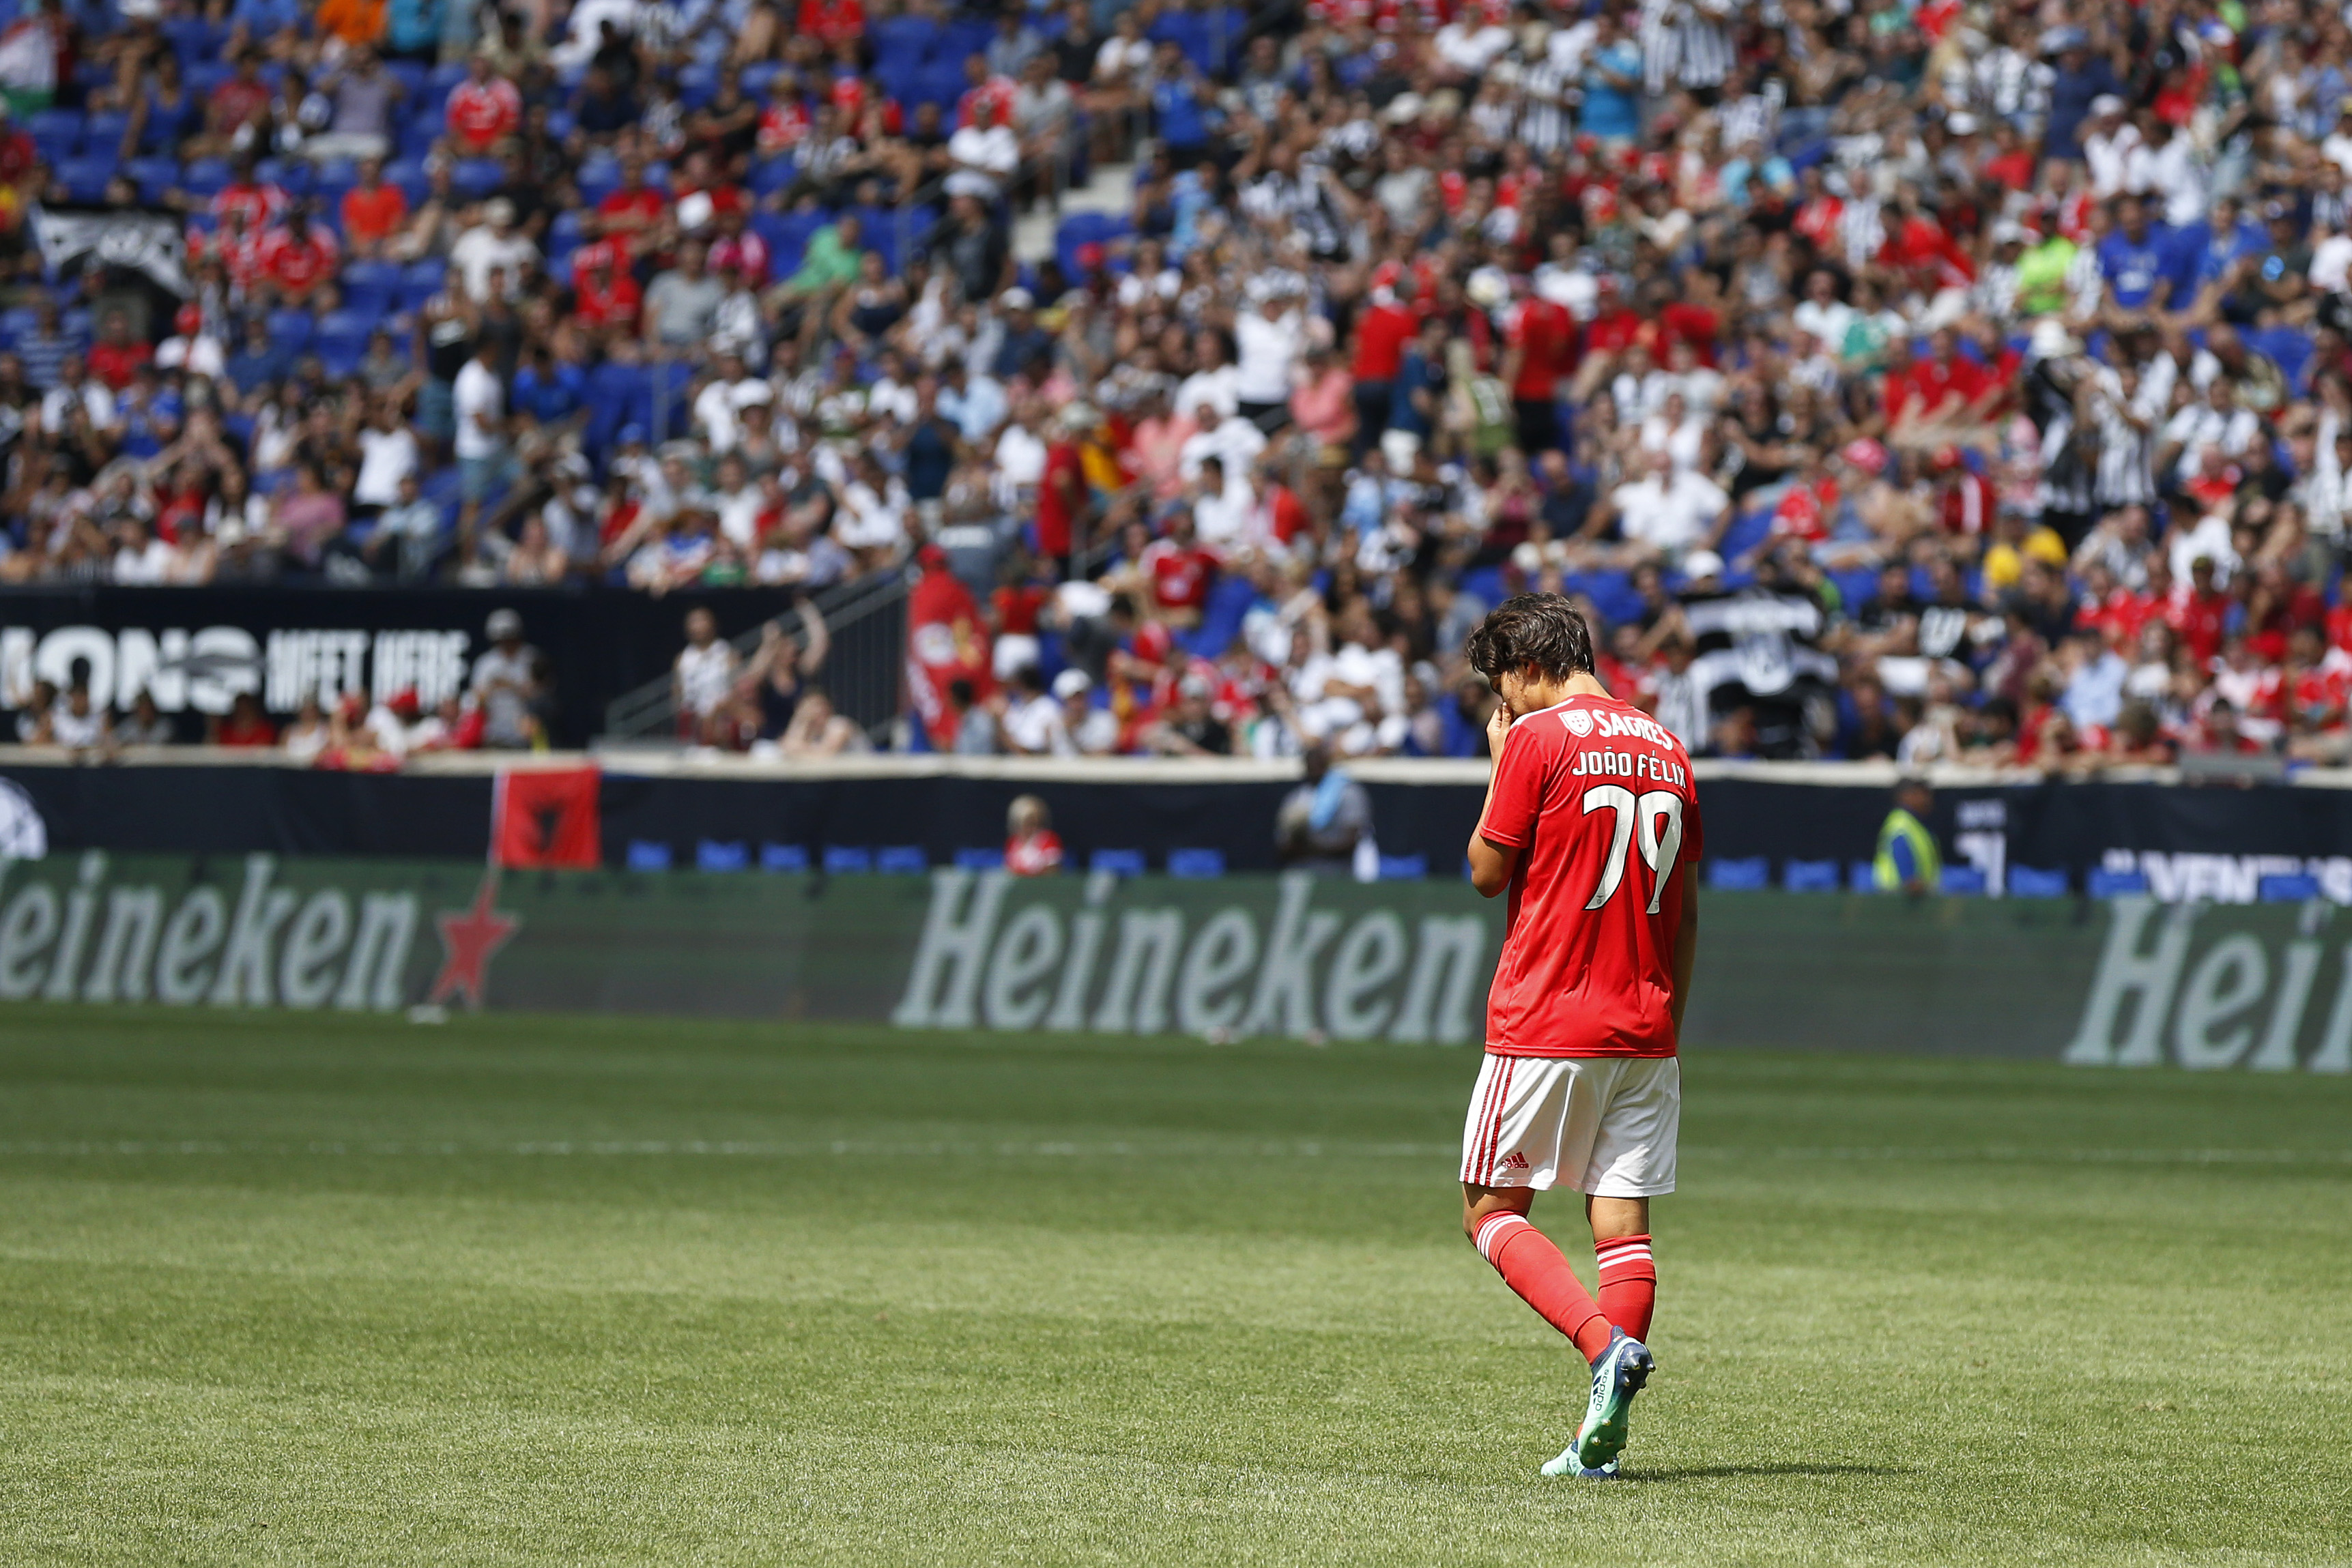 HARRISON, NJ - JULY 28: Joao Felix #79 of Benfica reacts after missing a shot during penalty kicks against Juventus during the International Champions Cup 2018 match between Benfica and Juventus at Red Bull Arena on July 28, 2018 in Harrison, New Jersey. (Photo by Adam Hunger/Getty Images)